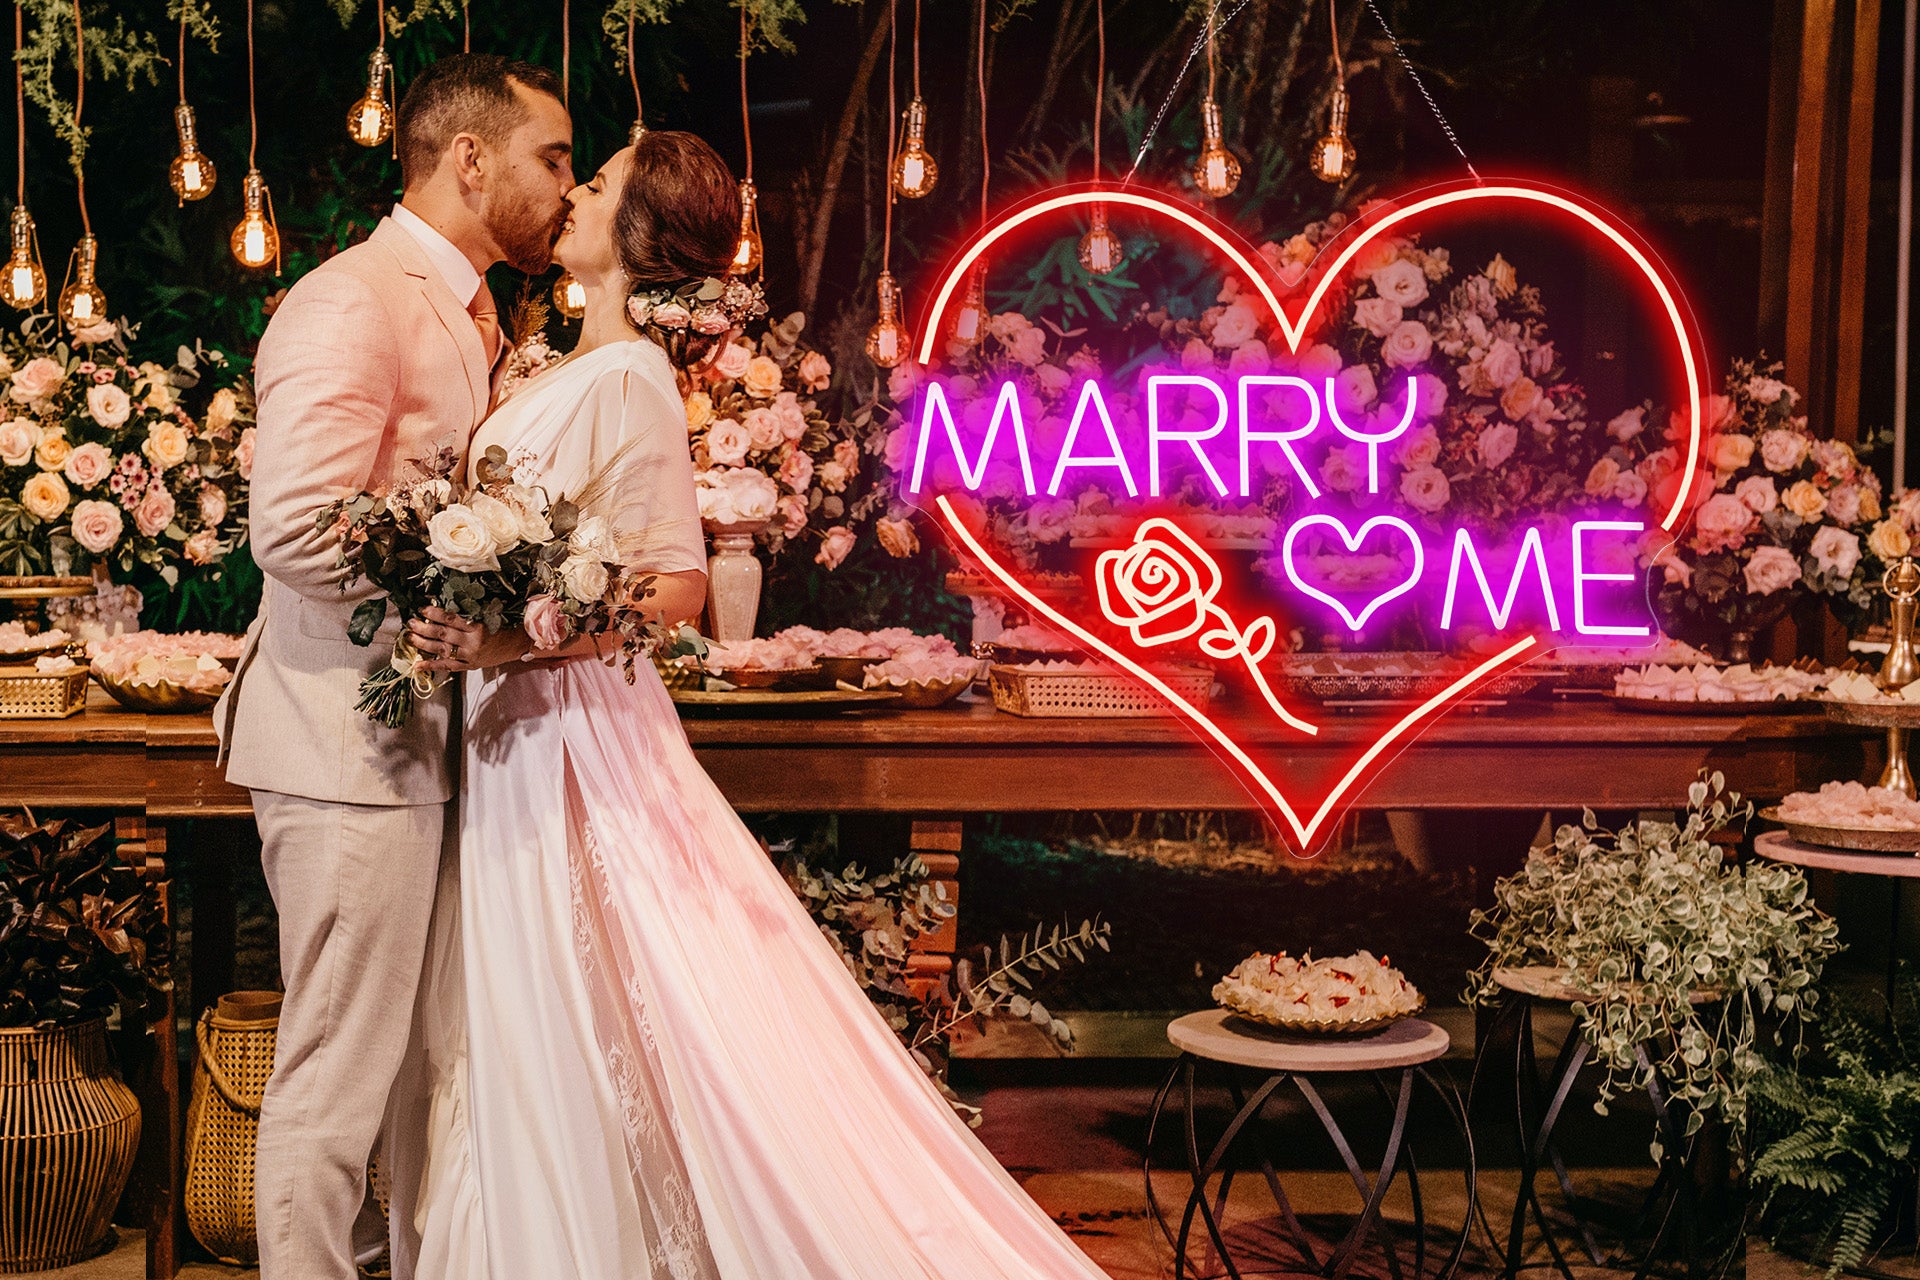 Wedding Neon Signs: You Need It to Leave a Best Memmory